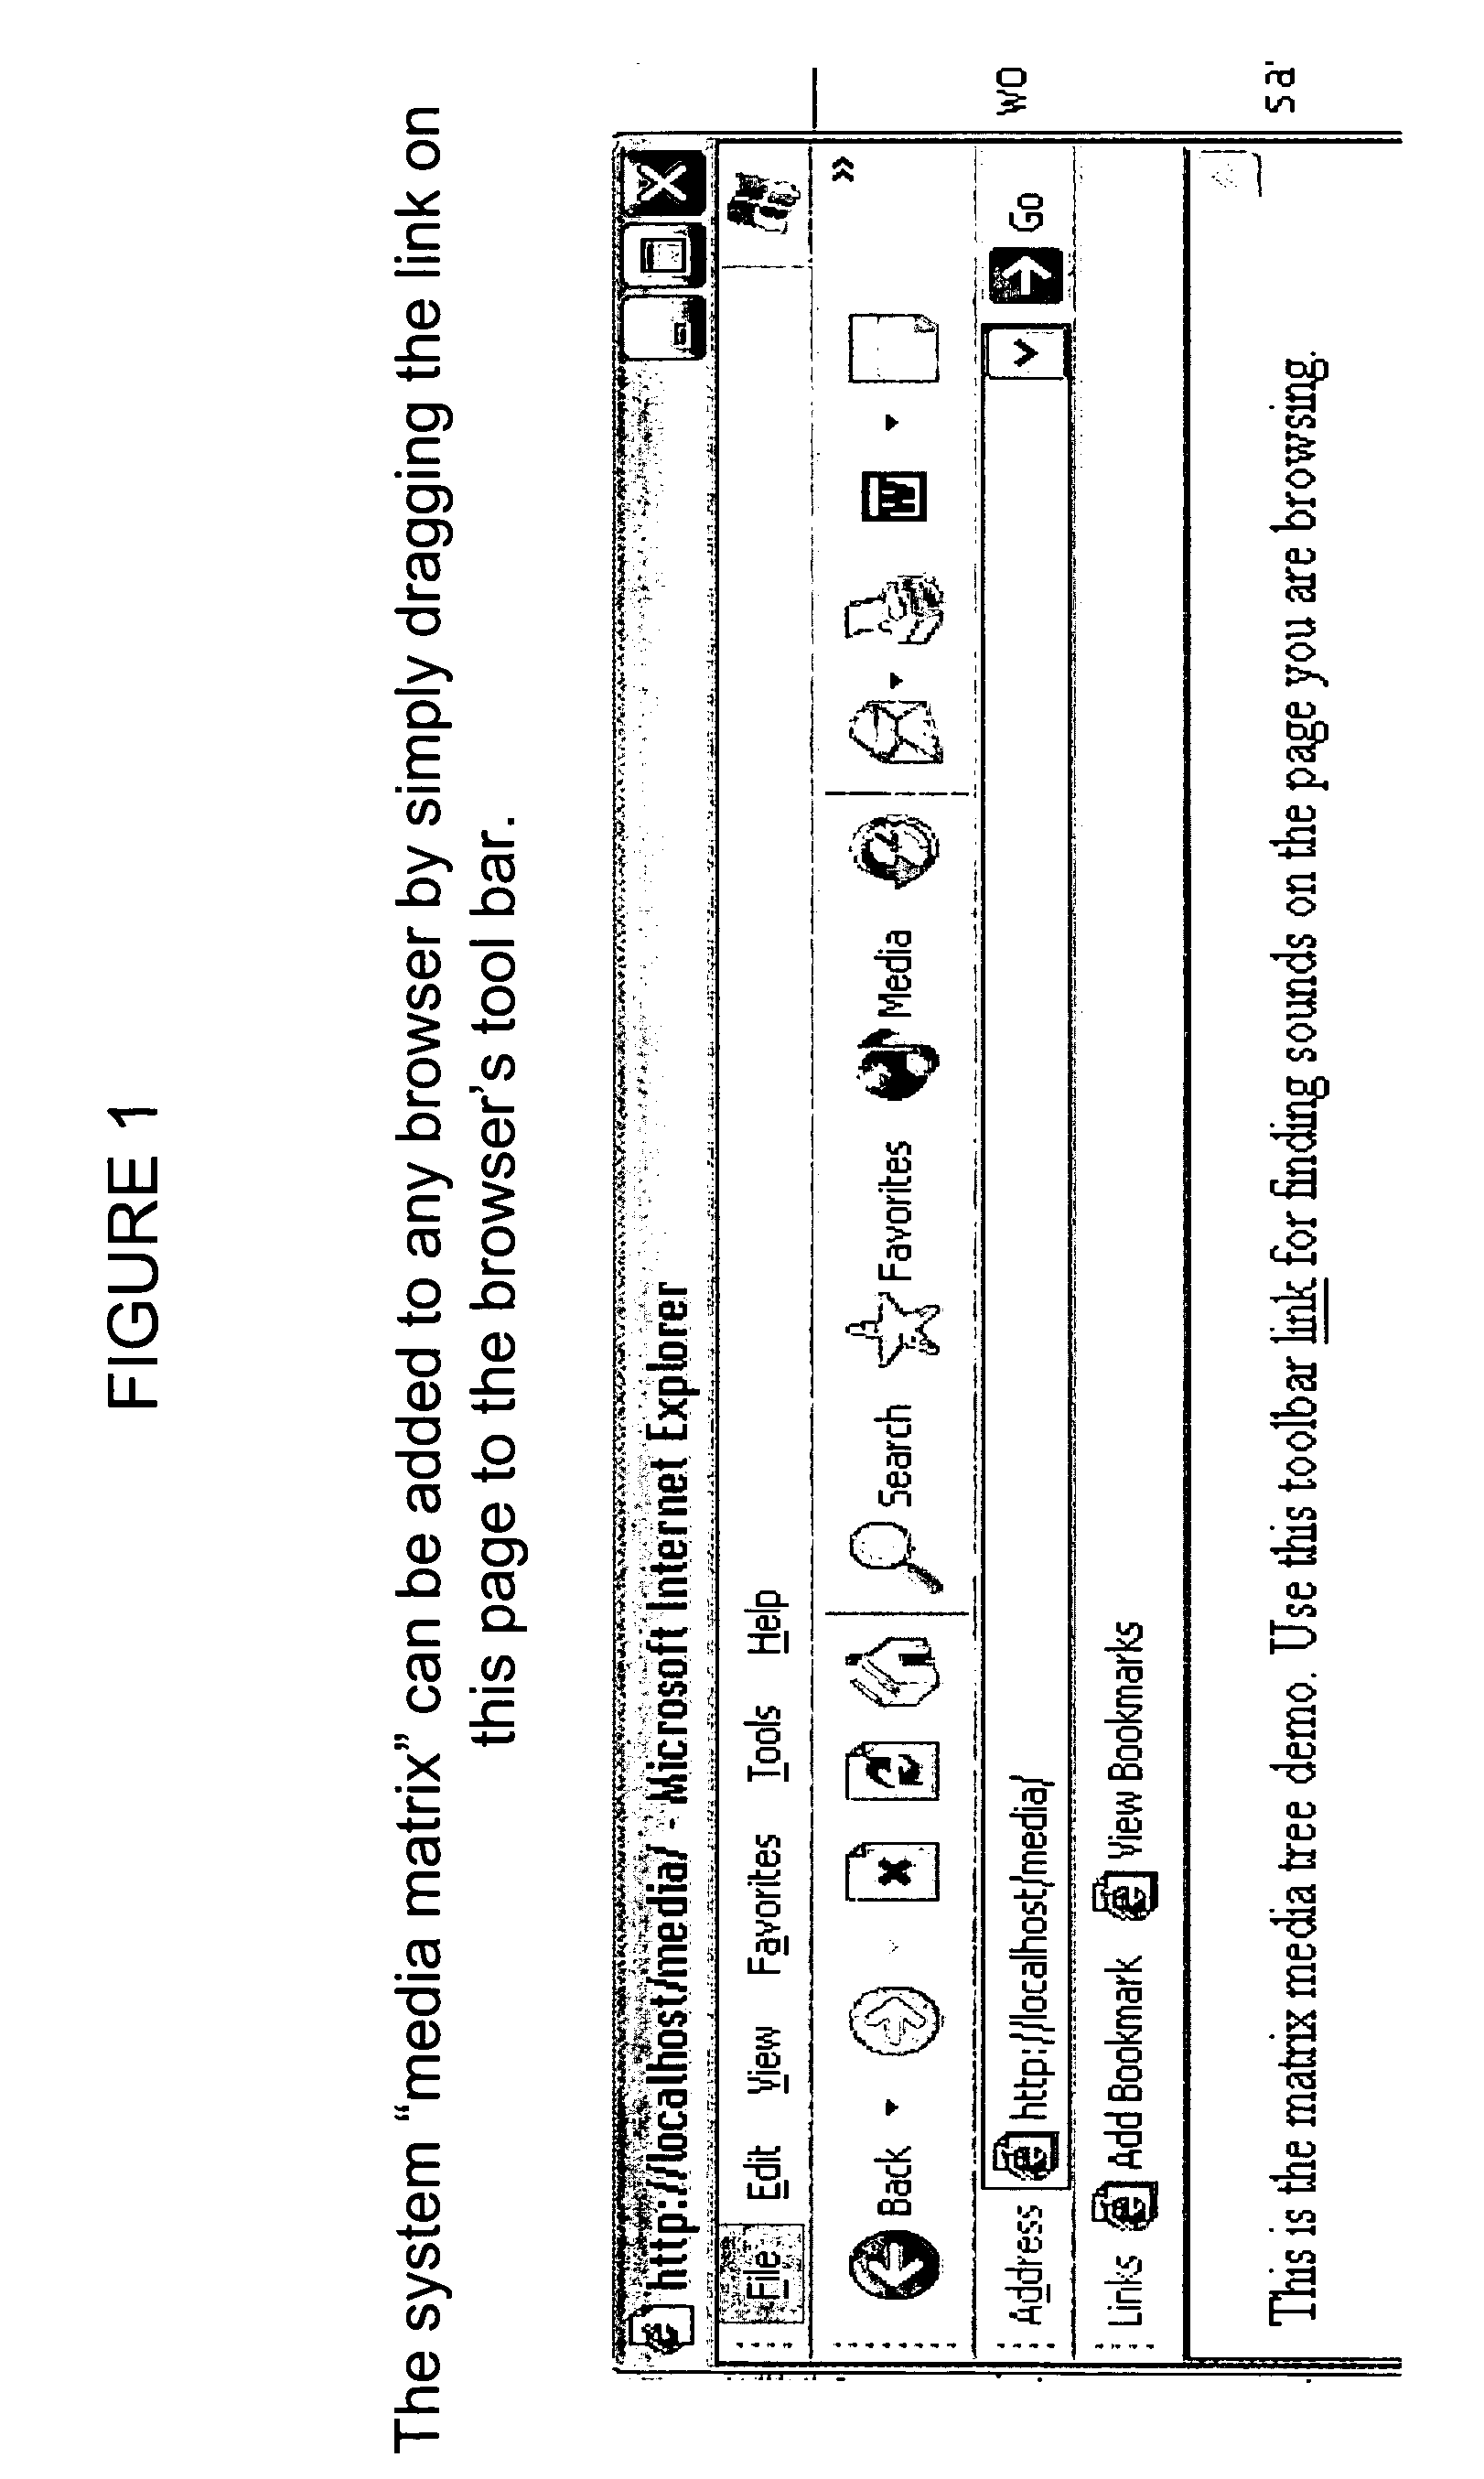 Systems and methods for identifying, segmenting, collecting, annotating, and publishing multimedia materials